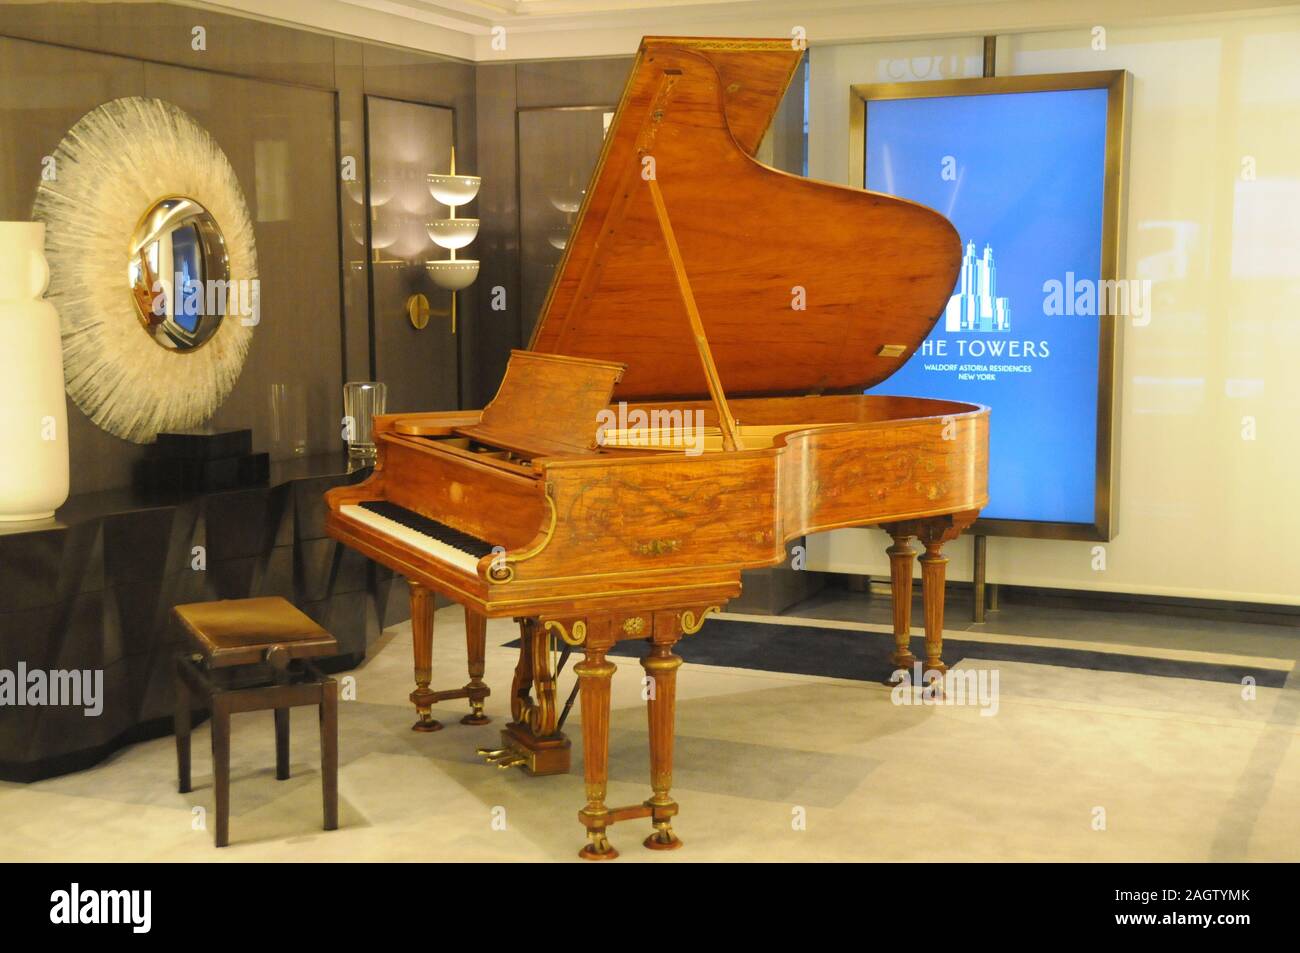 (191221) -- NEW YORK, Dec. 21, 2019 (Xinhua) -- The Cole Porter Piano is displayed after restoration in a showroom of Waldorf Astoria in New York, the United States, Dec. 19, 2019. The historic luxury hotel Waldorf Astoria New York (WANY) is making huge efforts in preserving its landmarks and artifacts while planning to start the sales of condominium residences in February 2020 and put the hotel back to business in early 2022, according to its management team, sales agent and experts. TO GO WITH 'Feature: New York's iconic Waldorf Astoria to offer residents ownership for 1st time' (Xinhua/Liu Stock Photo